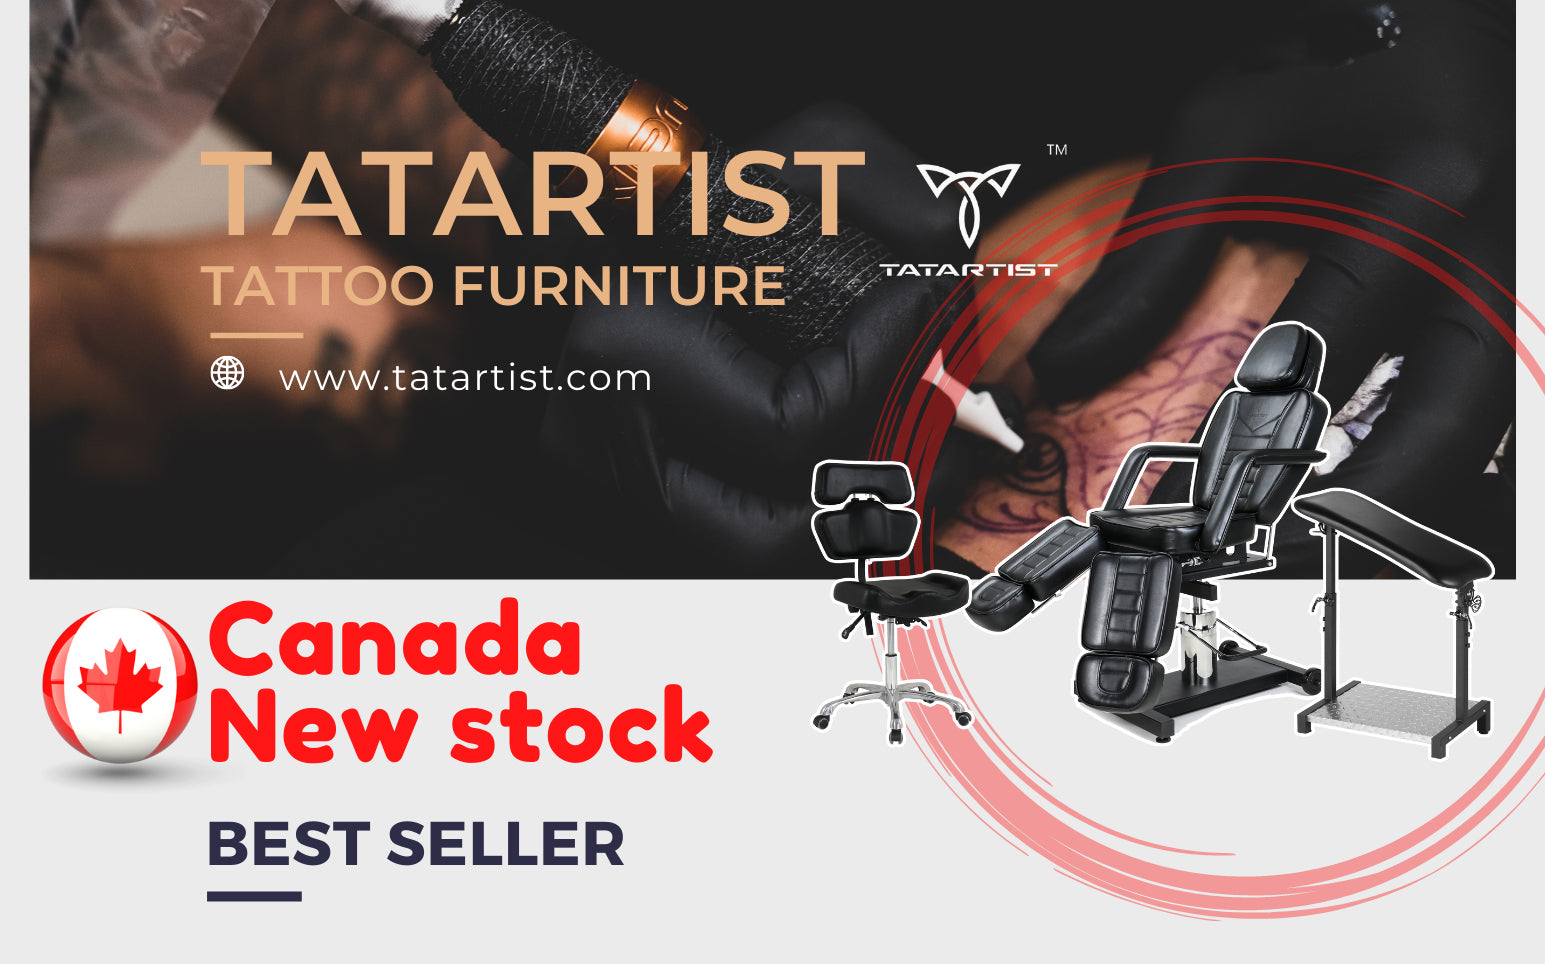 Canadian Tattoo Furniture Now Available